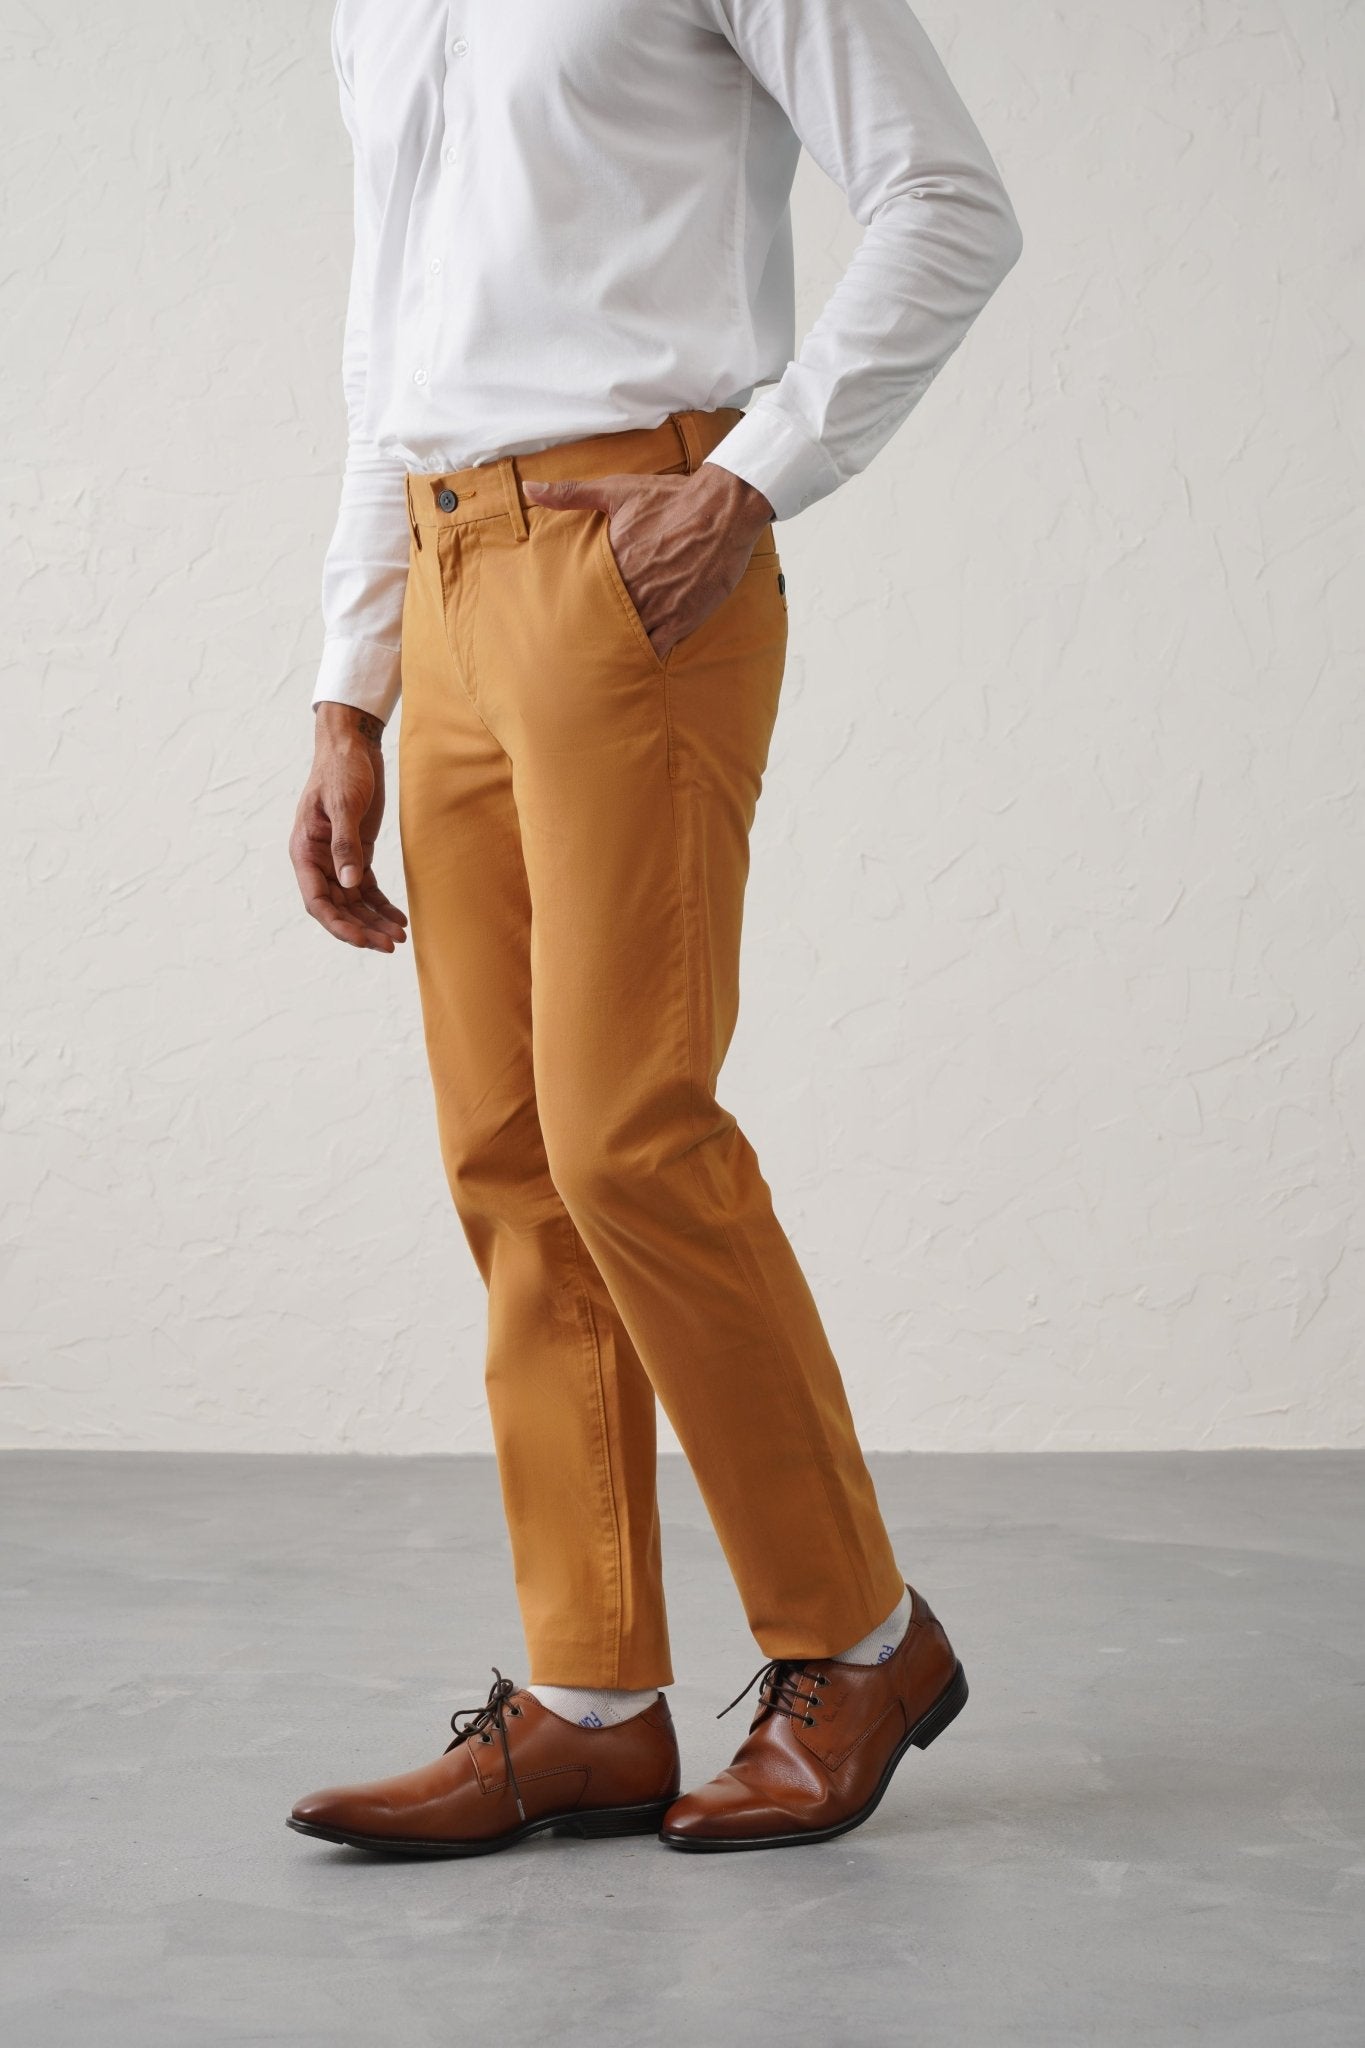 Buy Quicksand Slim Fit Chino Trouser Online for Men | Minus One